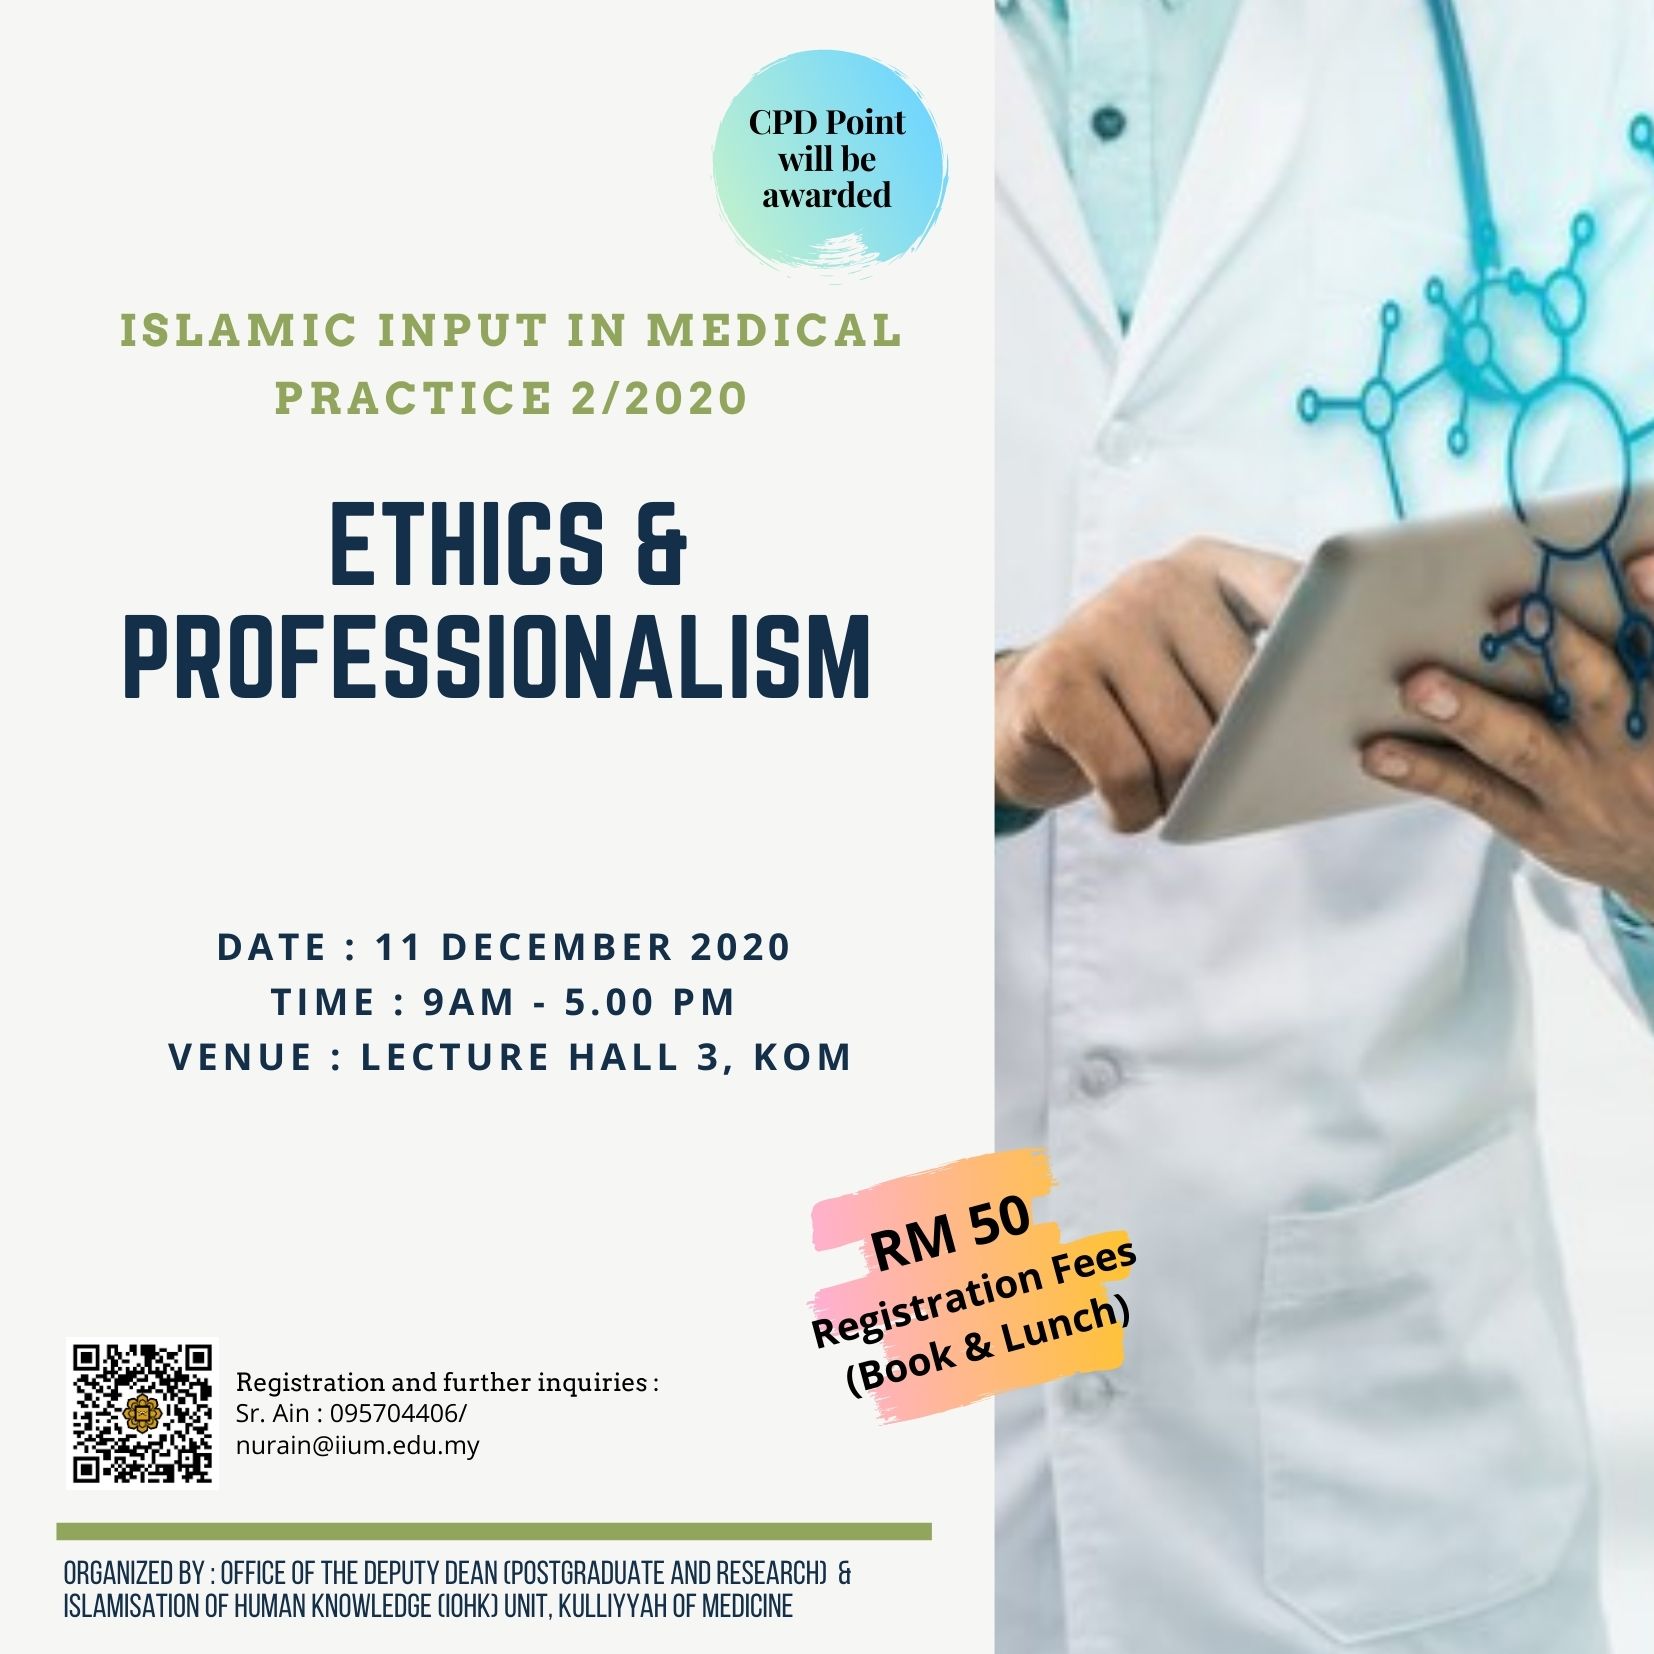 SEMINAR ON ISLAMIC INPUT IN MEDICAL PRACTICE : ETHICS AND PROFESSIONALISM (N0.2/2020)